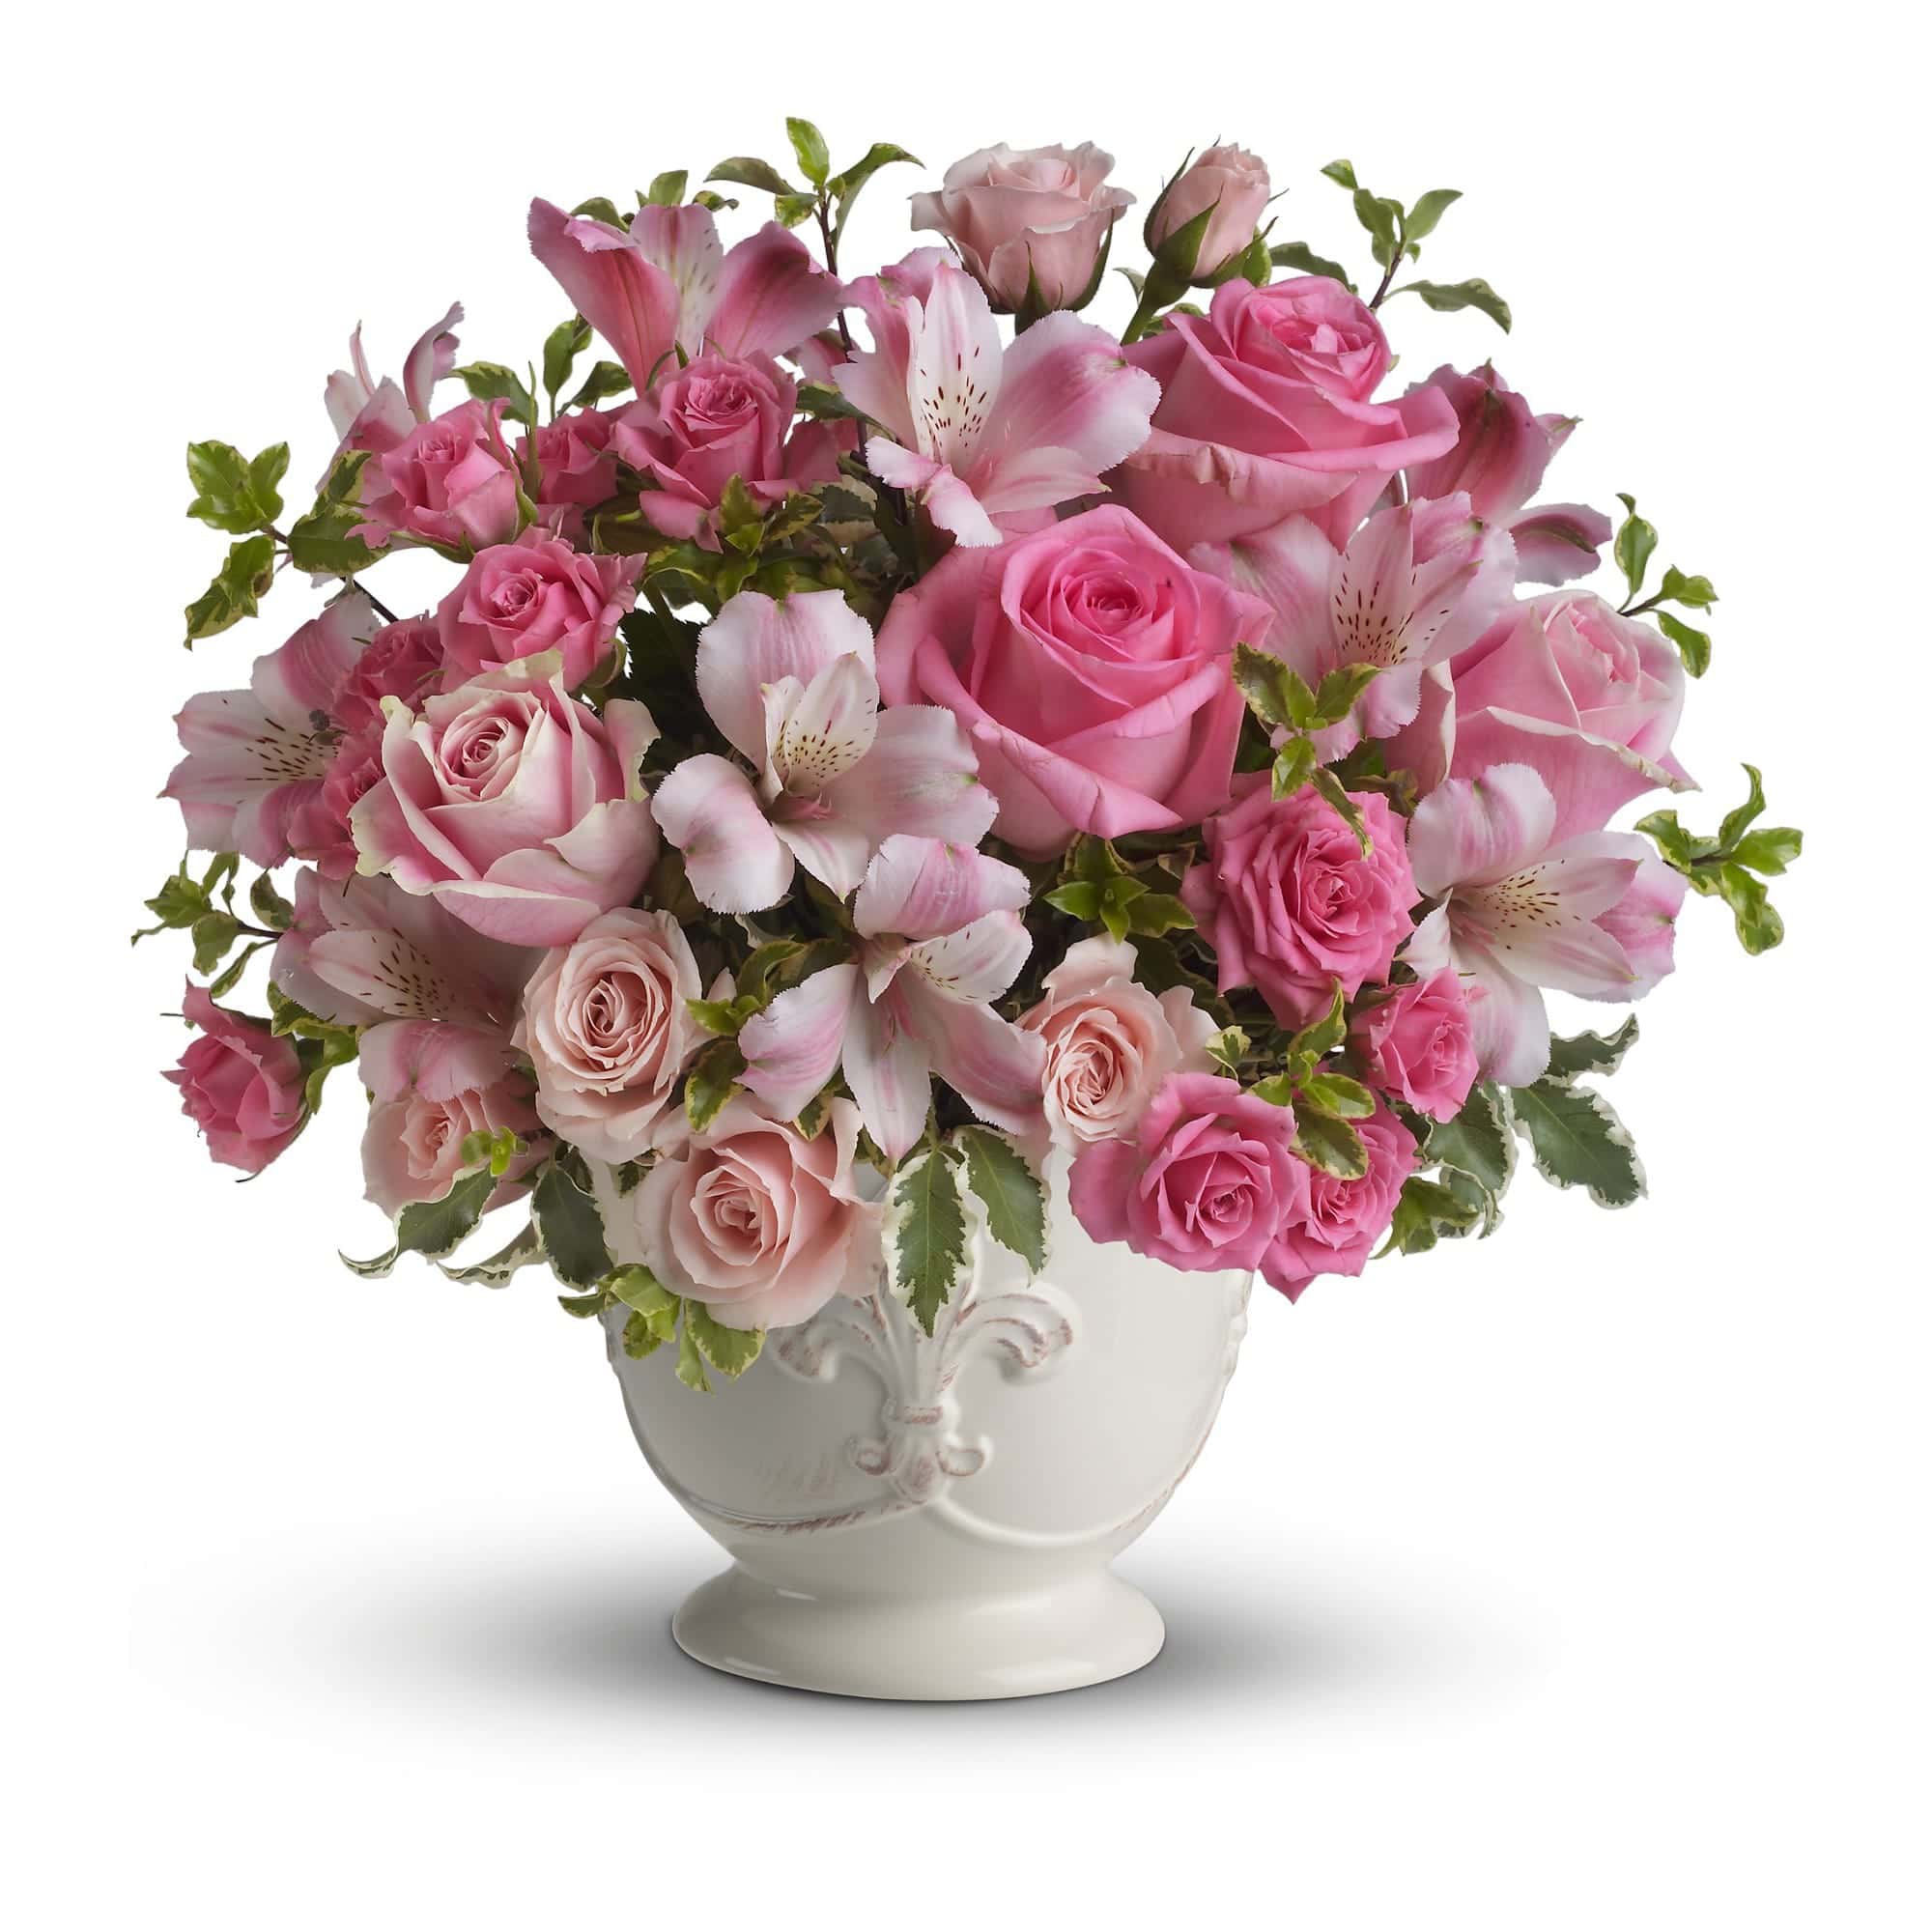 pink roses, pink alstroemeria and green pitta negra